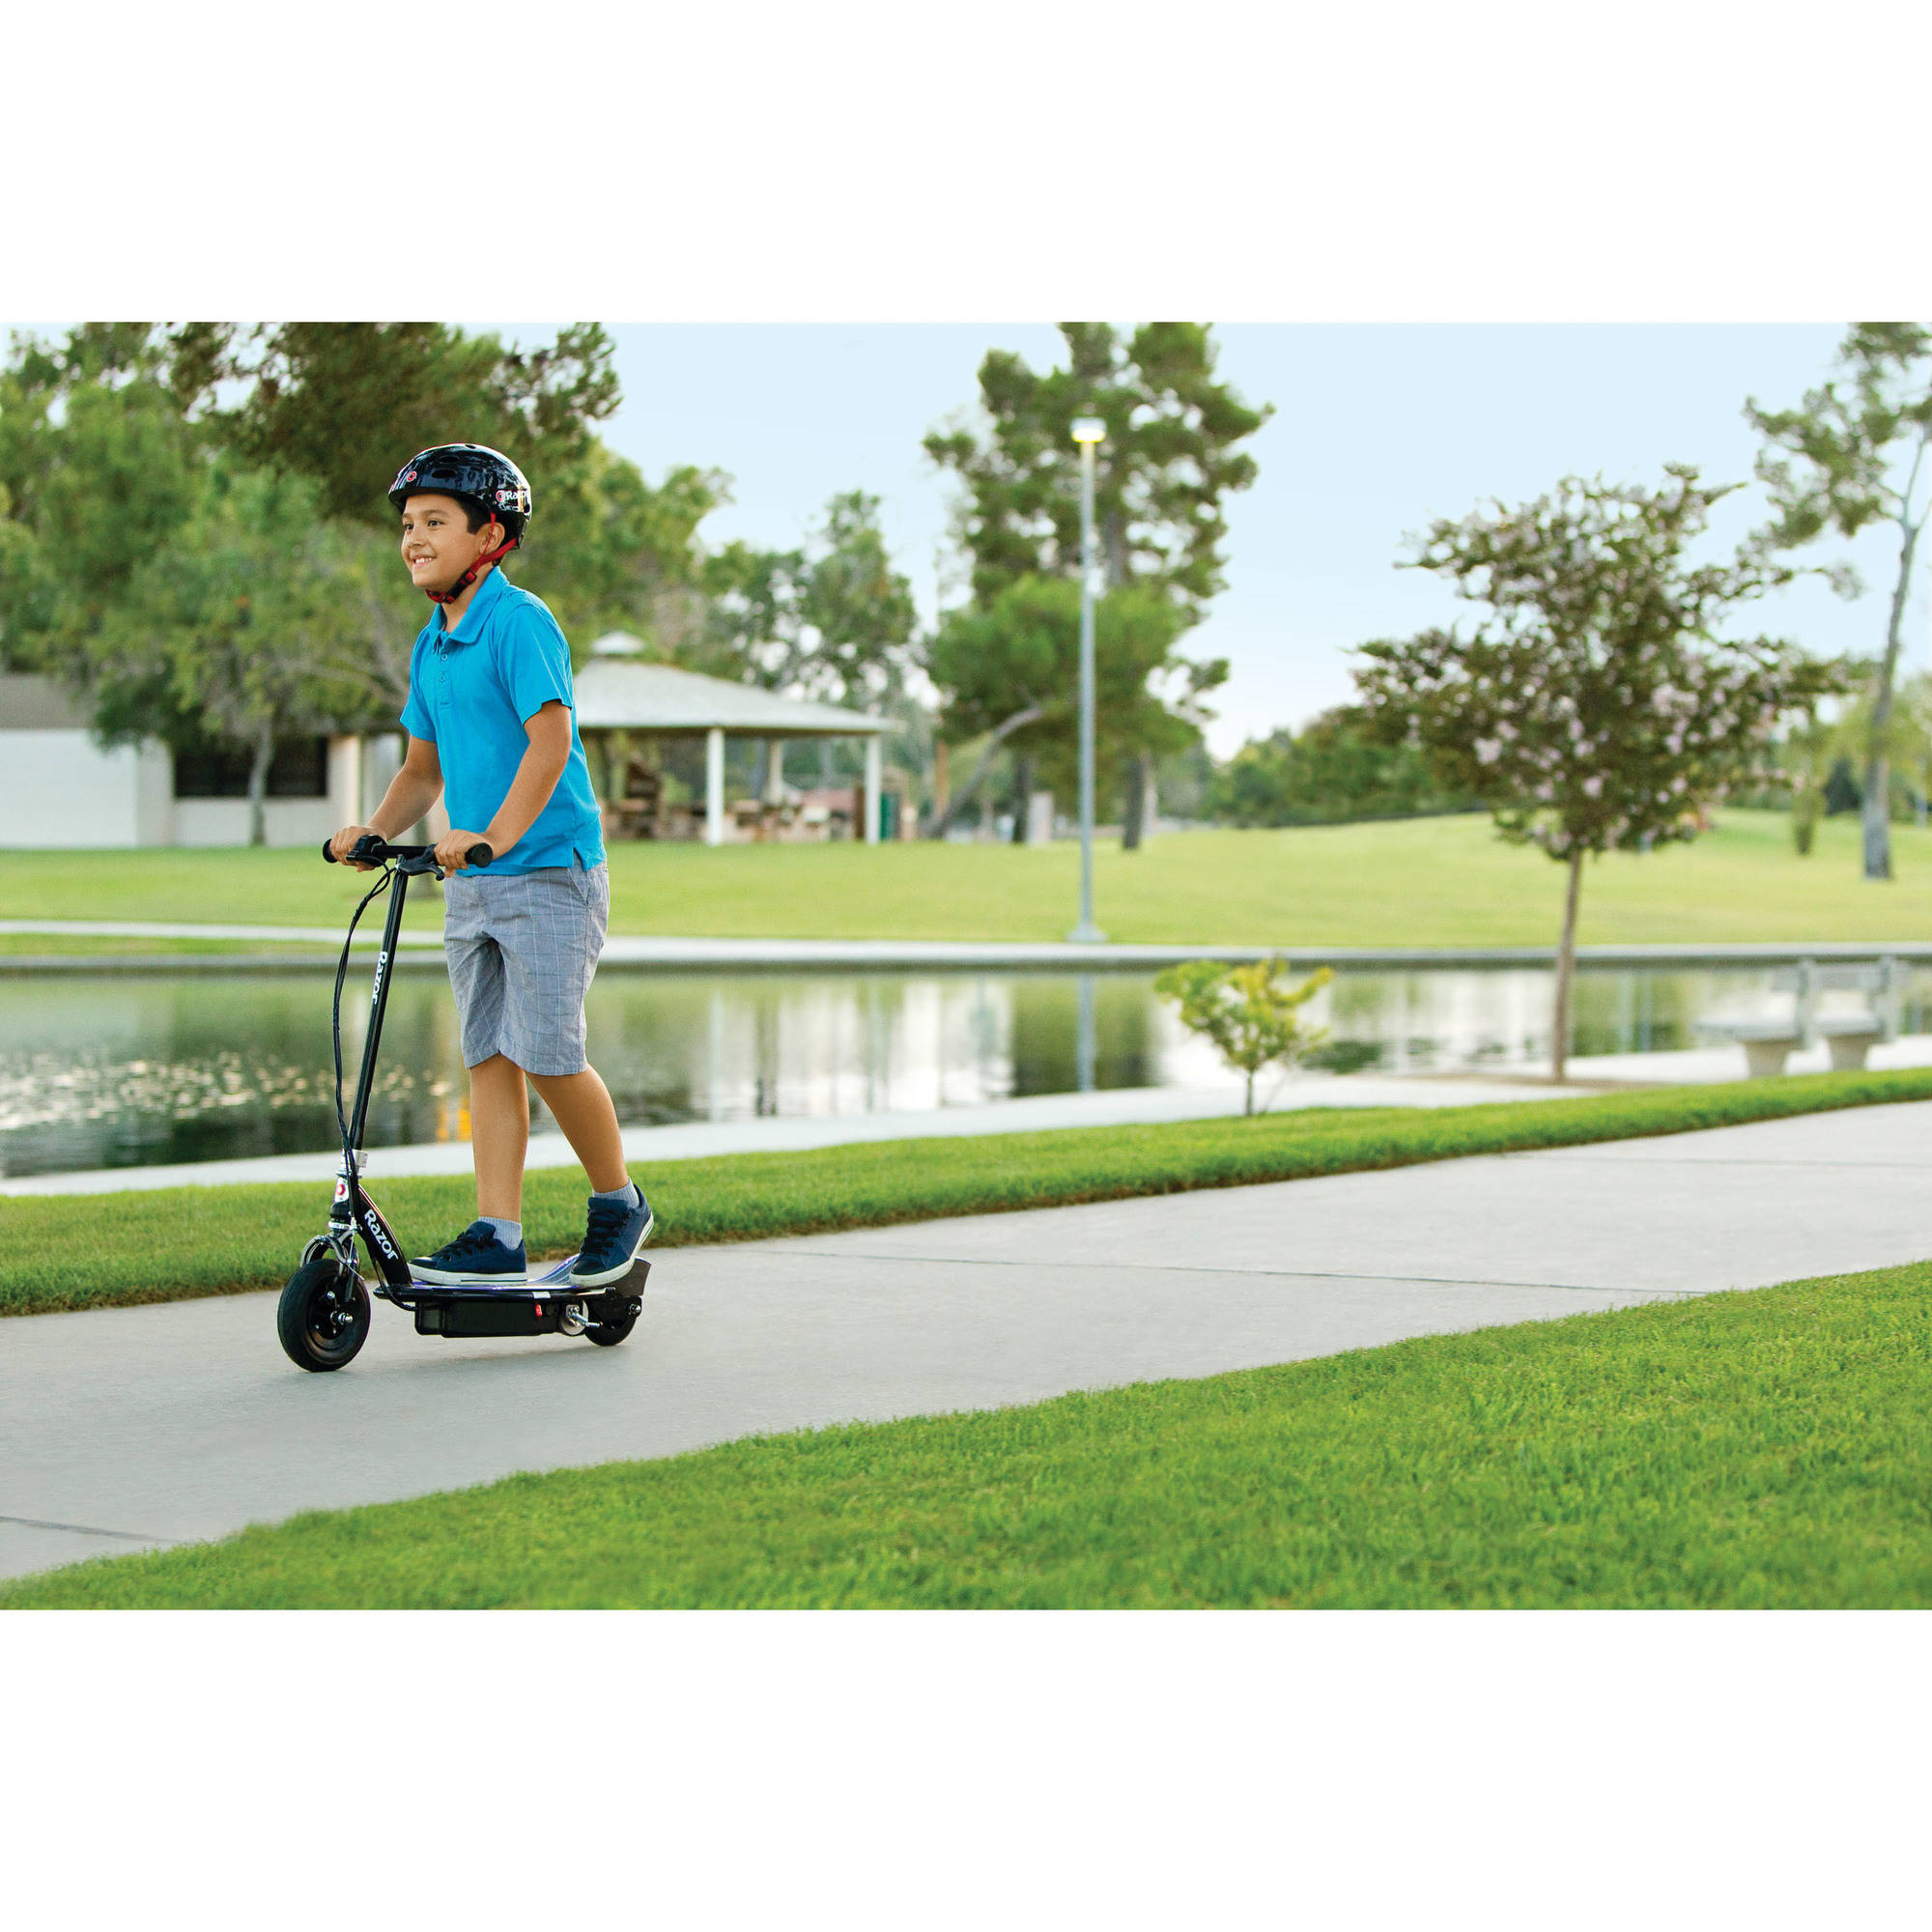 Razor E100 Electric-Powered Glow Electric Scooter, Black - image 5 of 13